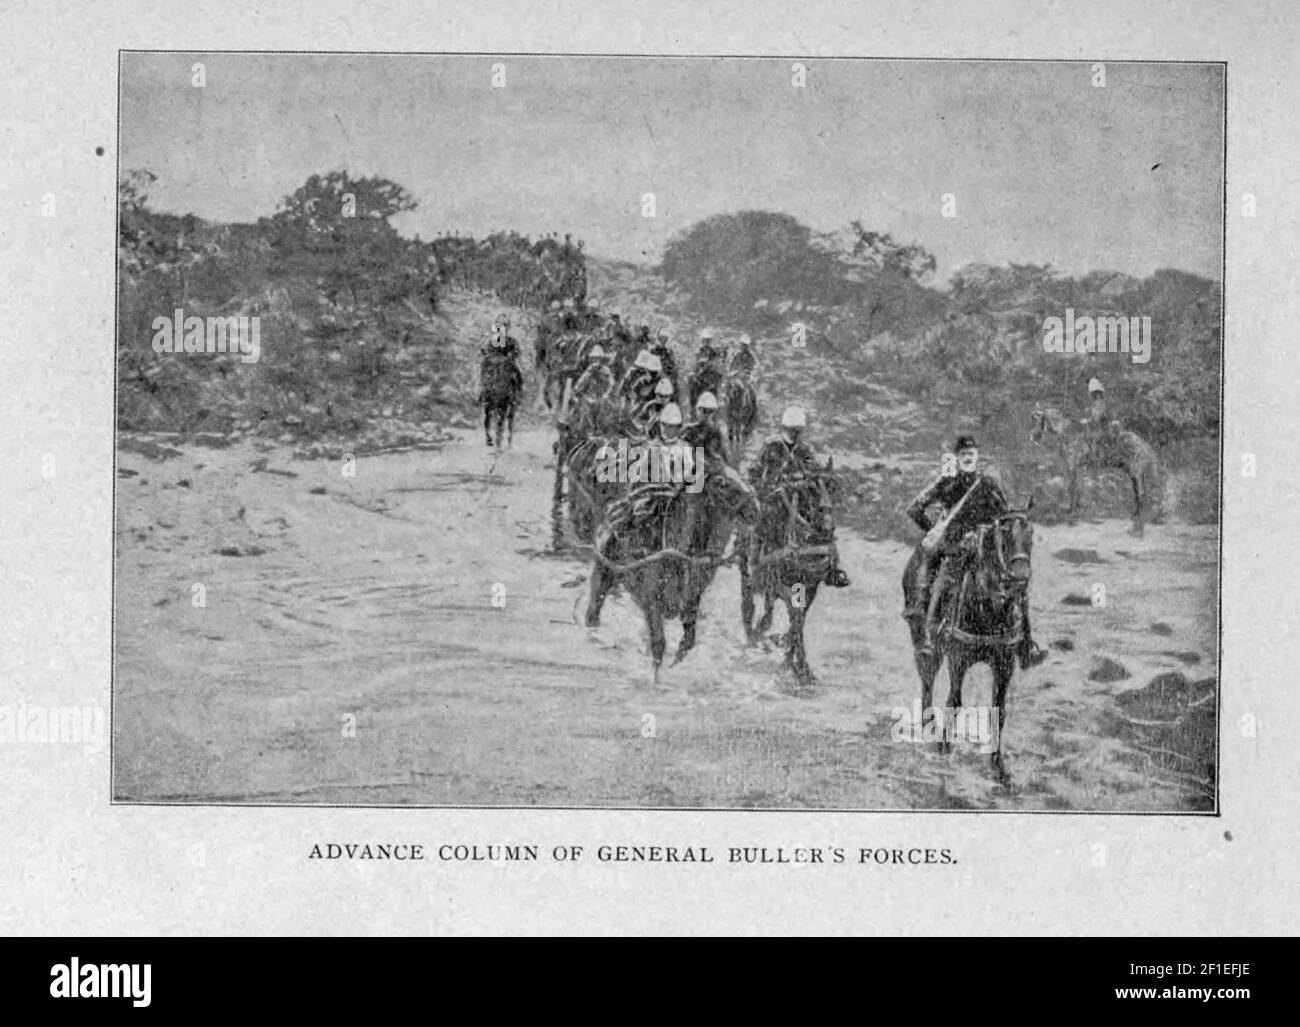 Advance column of General Buller's Forces from the book ' Boer and Britisher in South Africa; a history of the Boer-British war and the wars for United South Africa, together with biographies of the great men who made the history of South Africa ' By Neville, John Ormond Published by Thompson & Thomas, Chicago, USA in 1900 Stock Photo